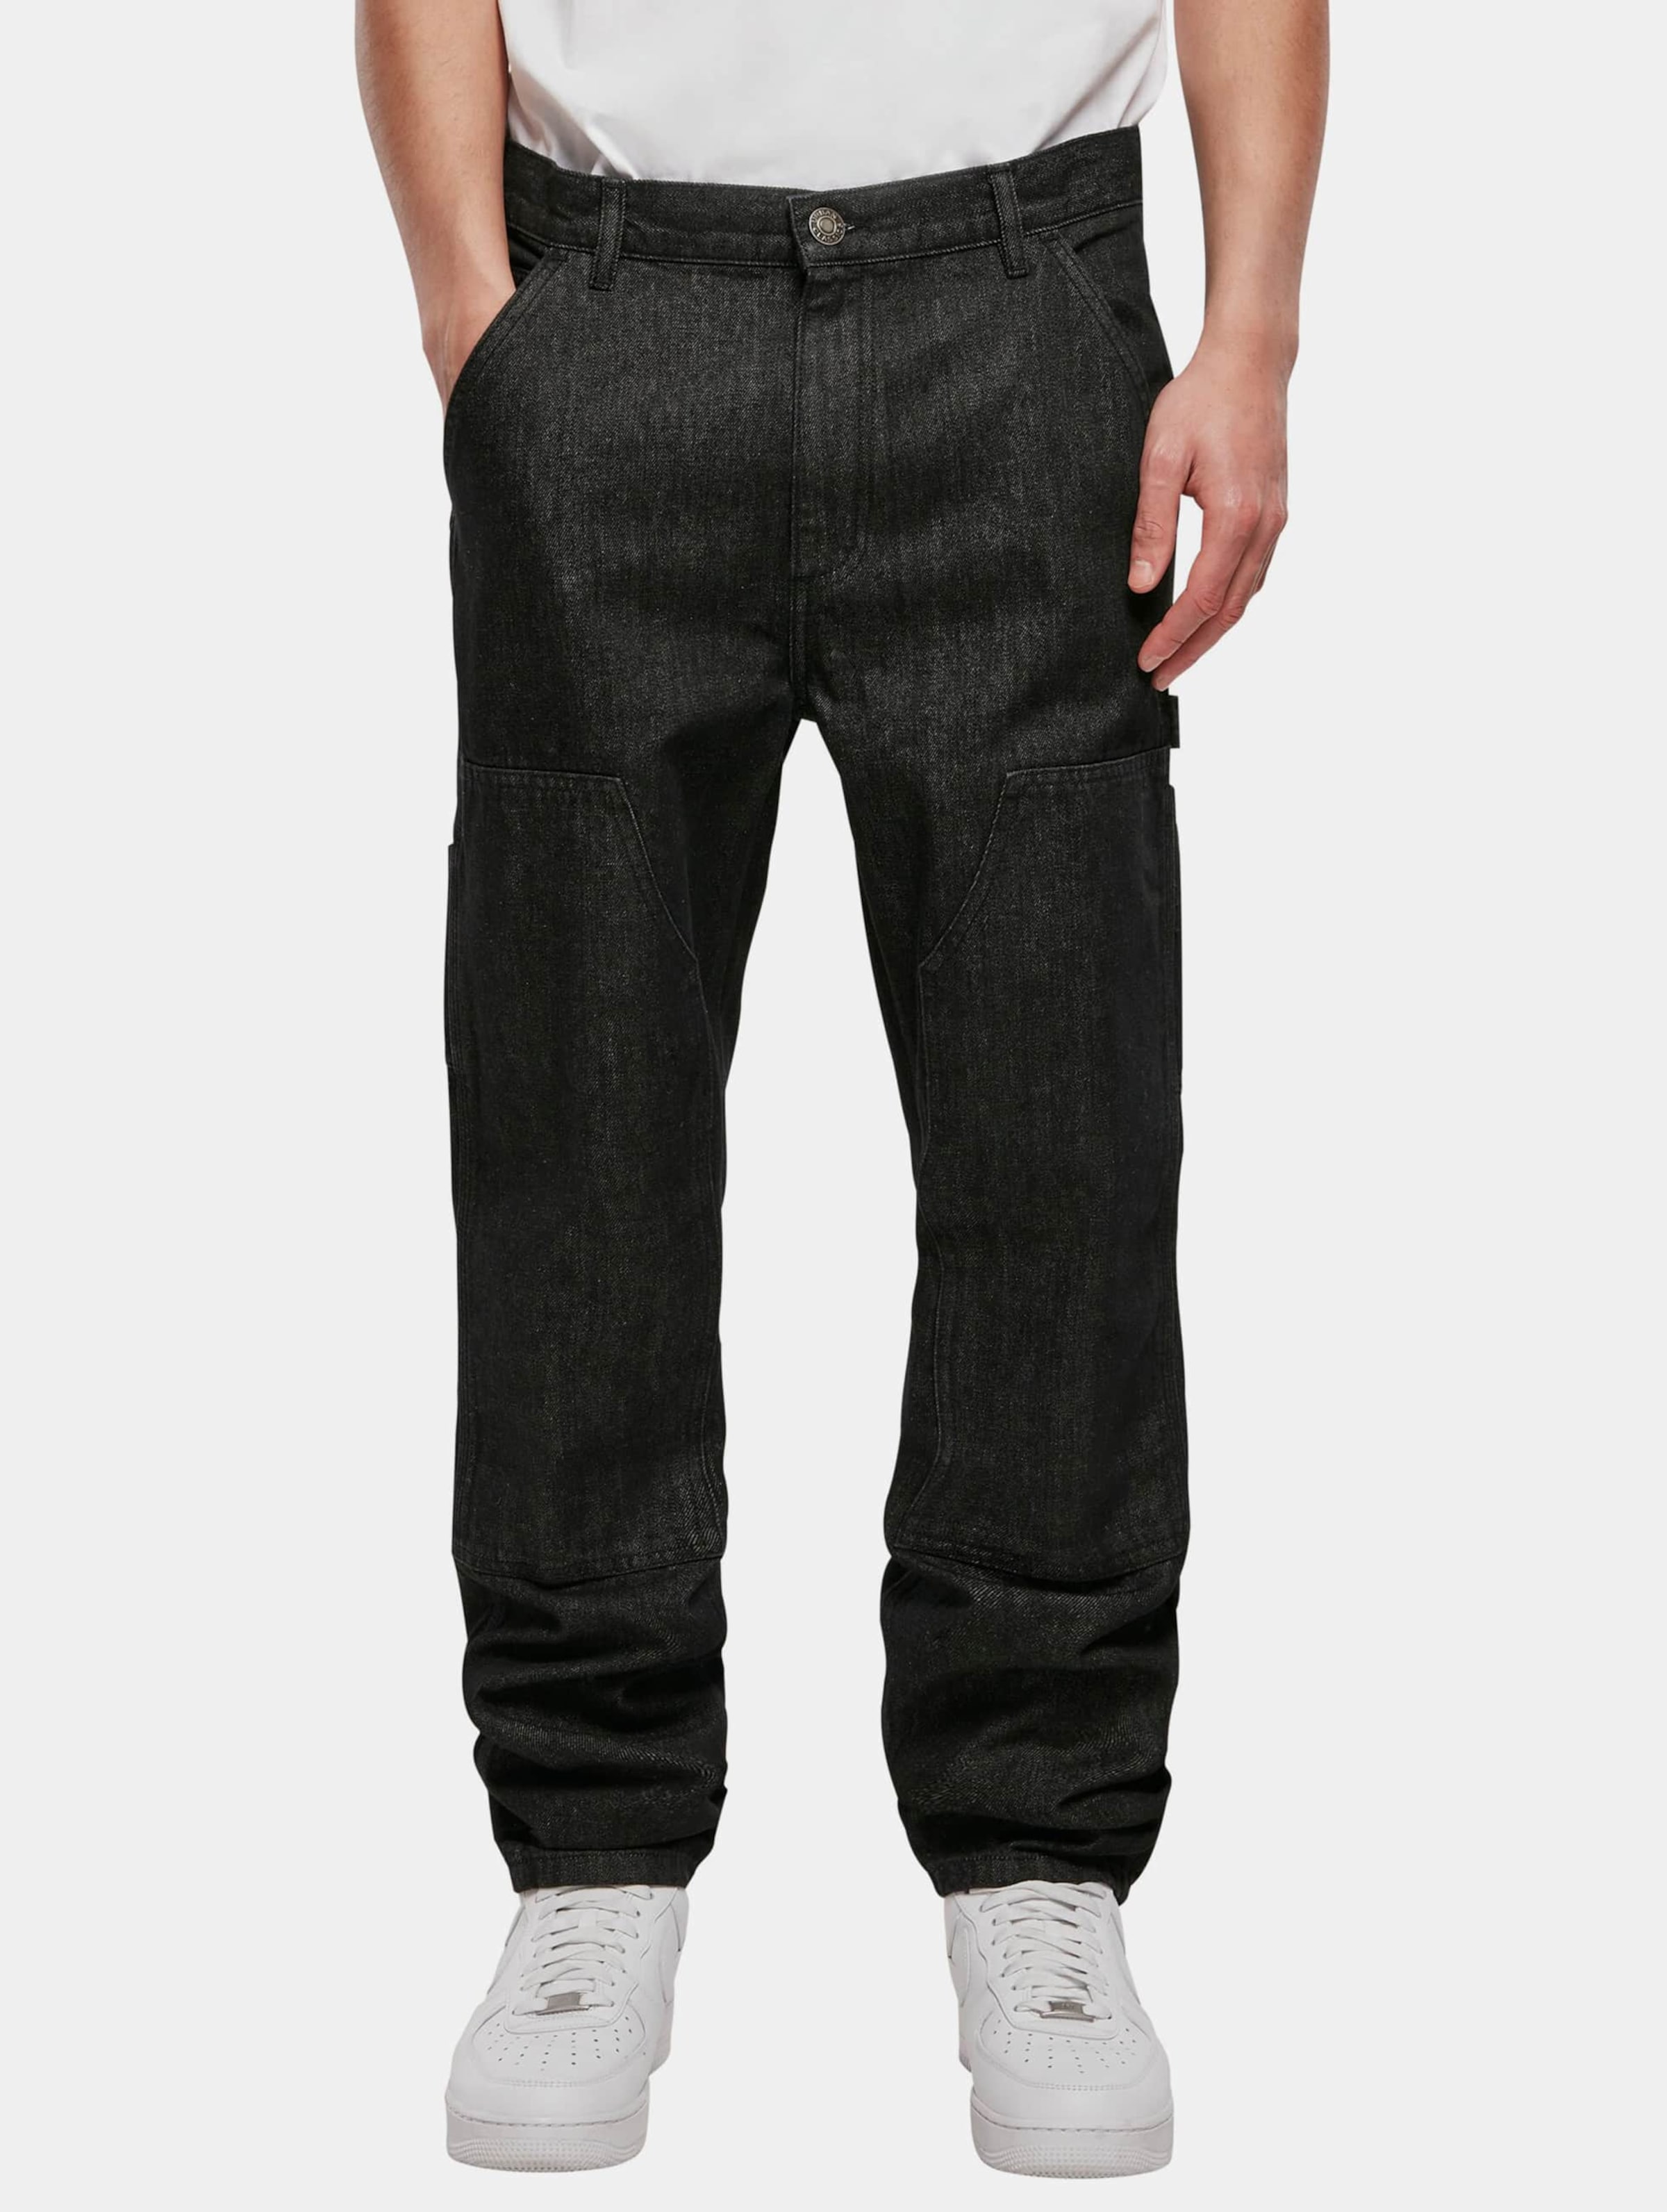 Urban Classics Double Knee Loose Fit Jeans product